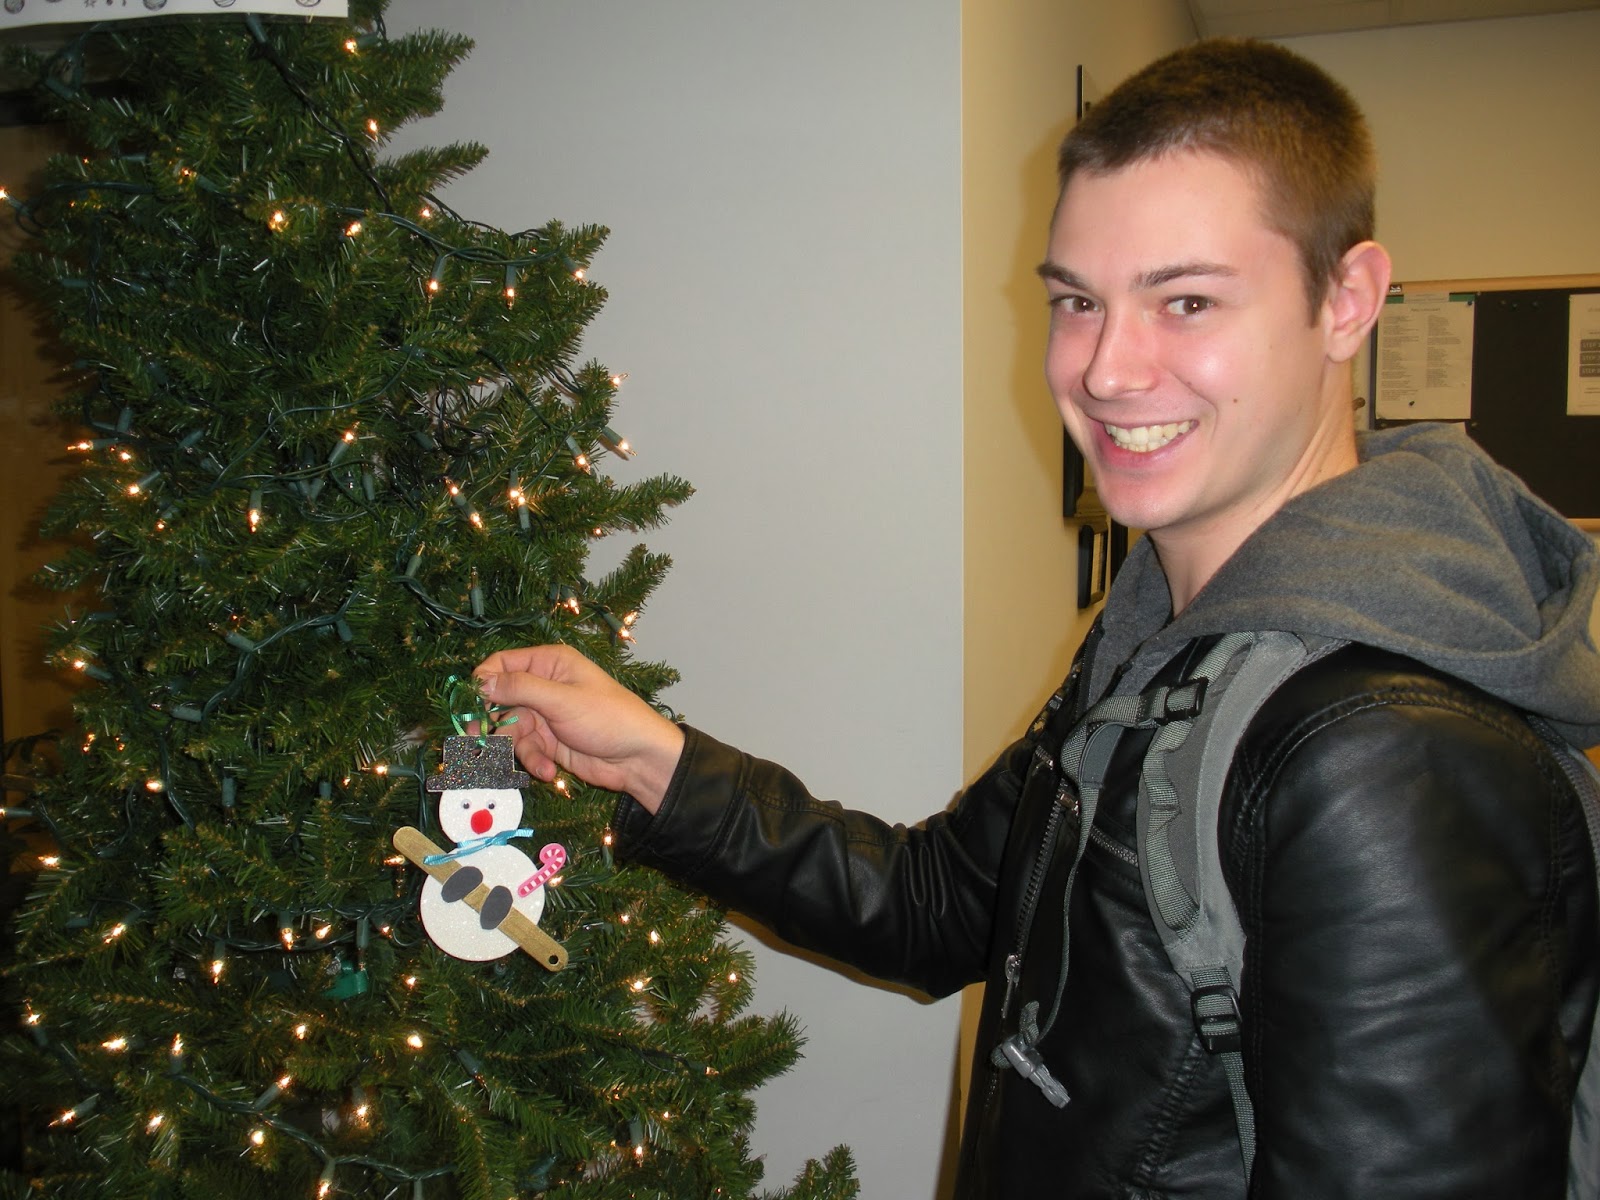 Saint Louis University Program in Physical Therapy: The &quot;For Pete&#39;s Sake Giving Tree&quot; Ornament ...